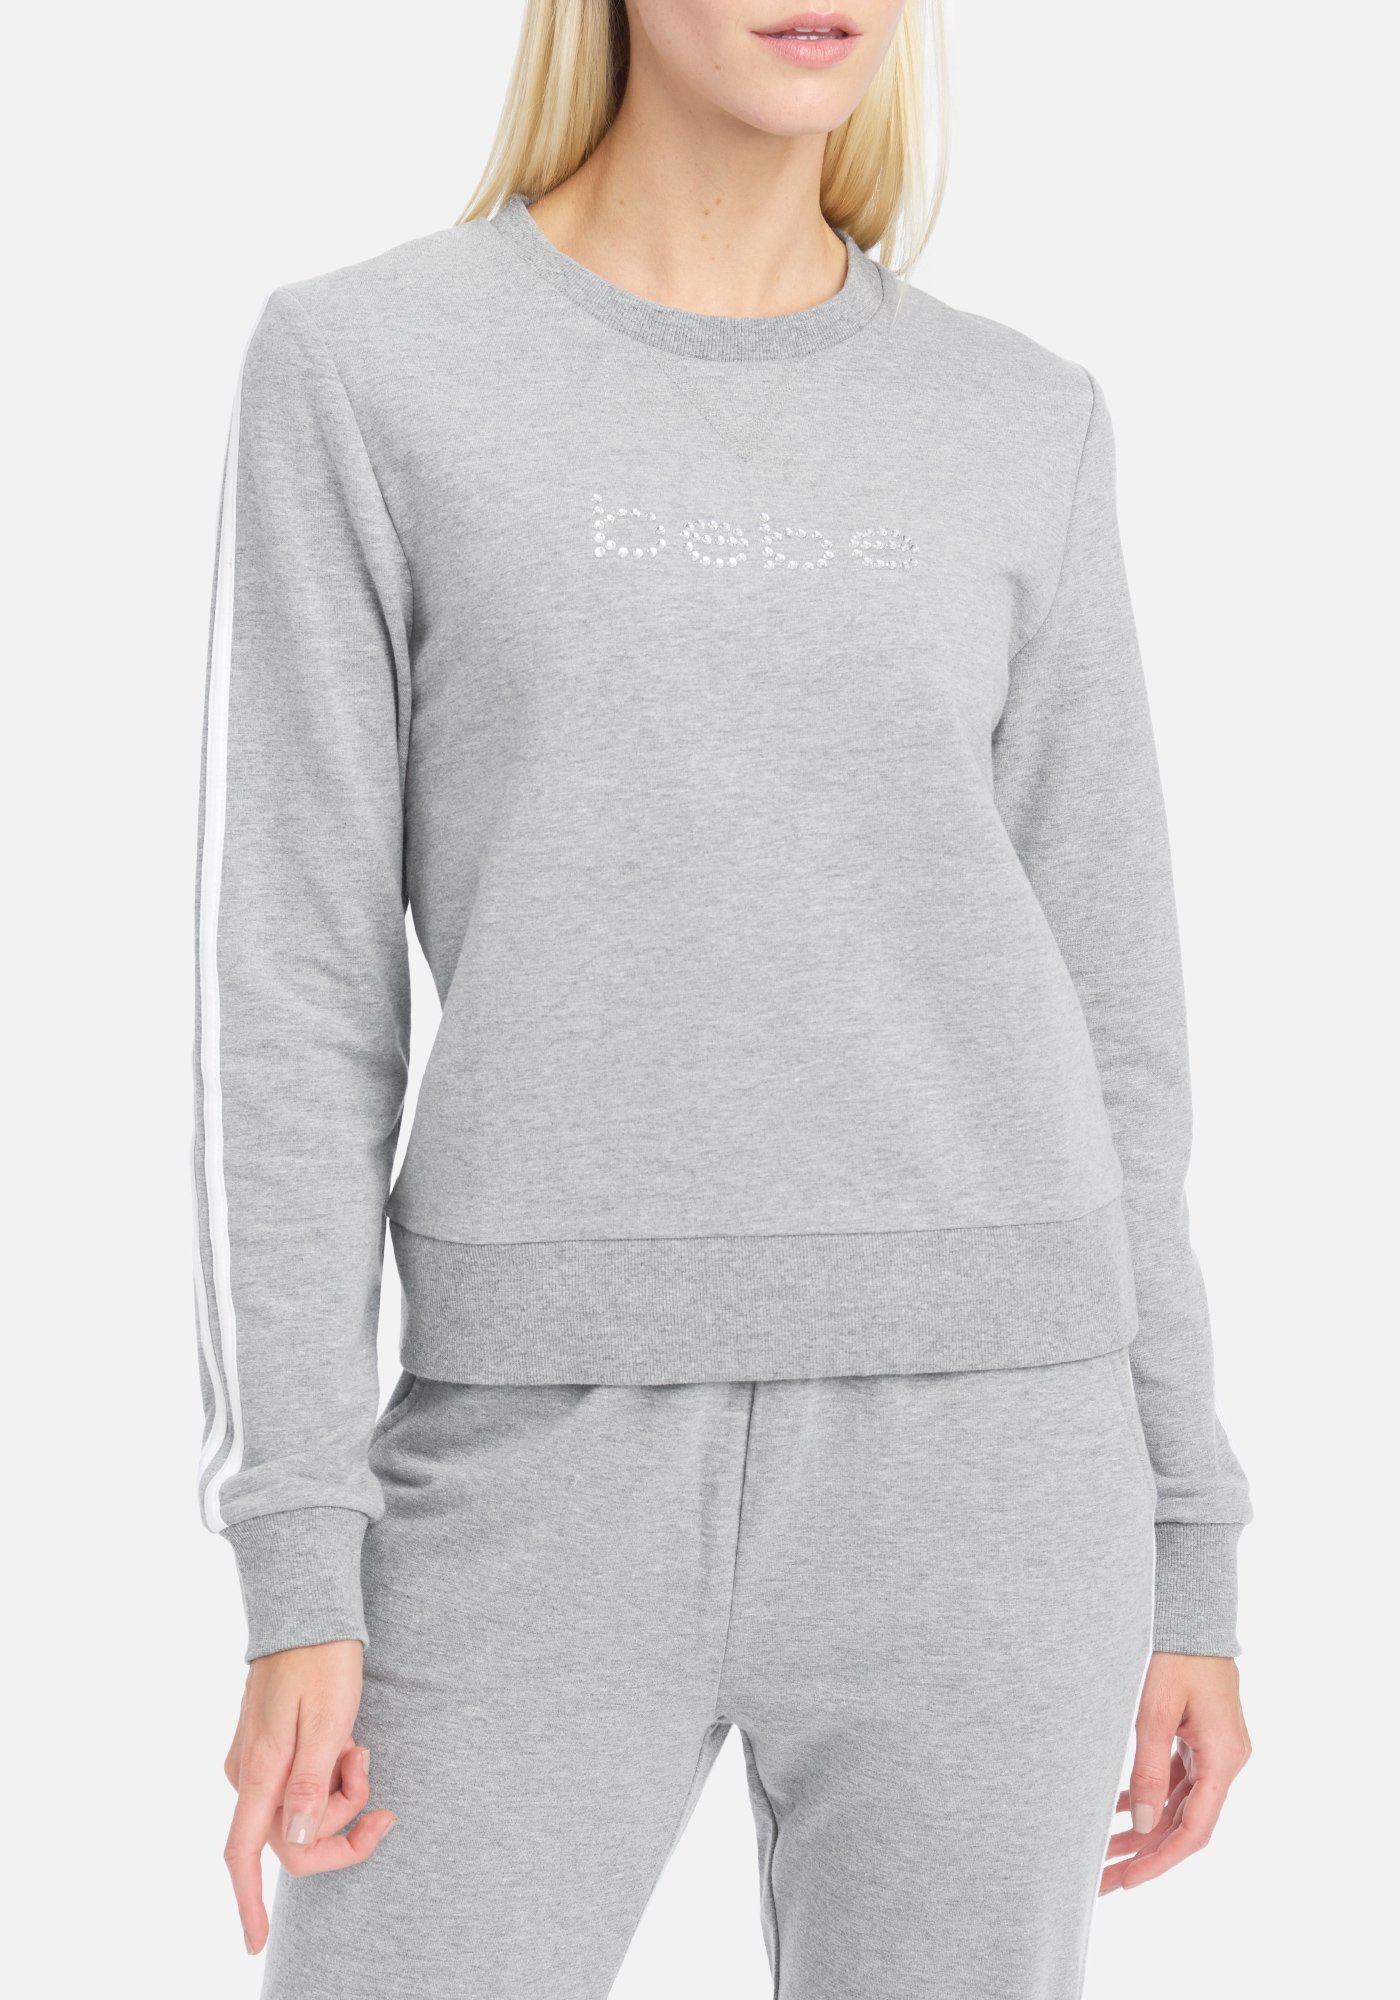 Women's Bebe Logo Contrast Sweater, Size Large in Grey Heather Cotton/Spandex